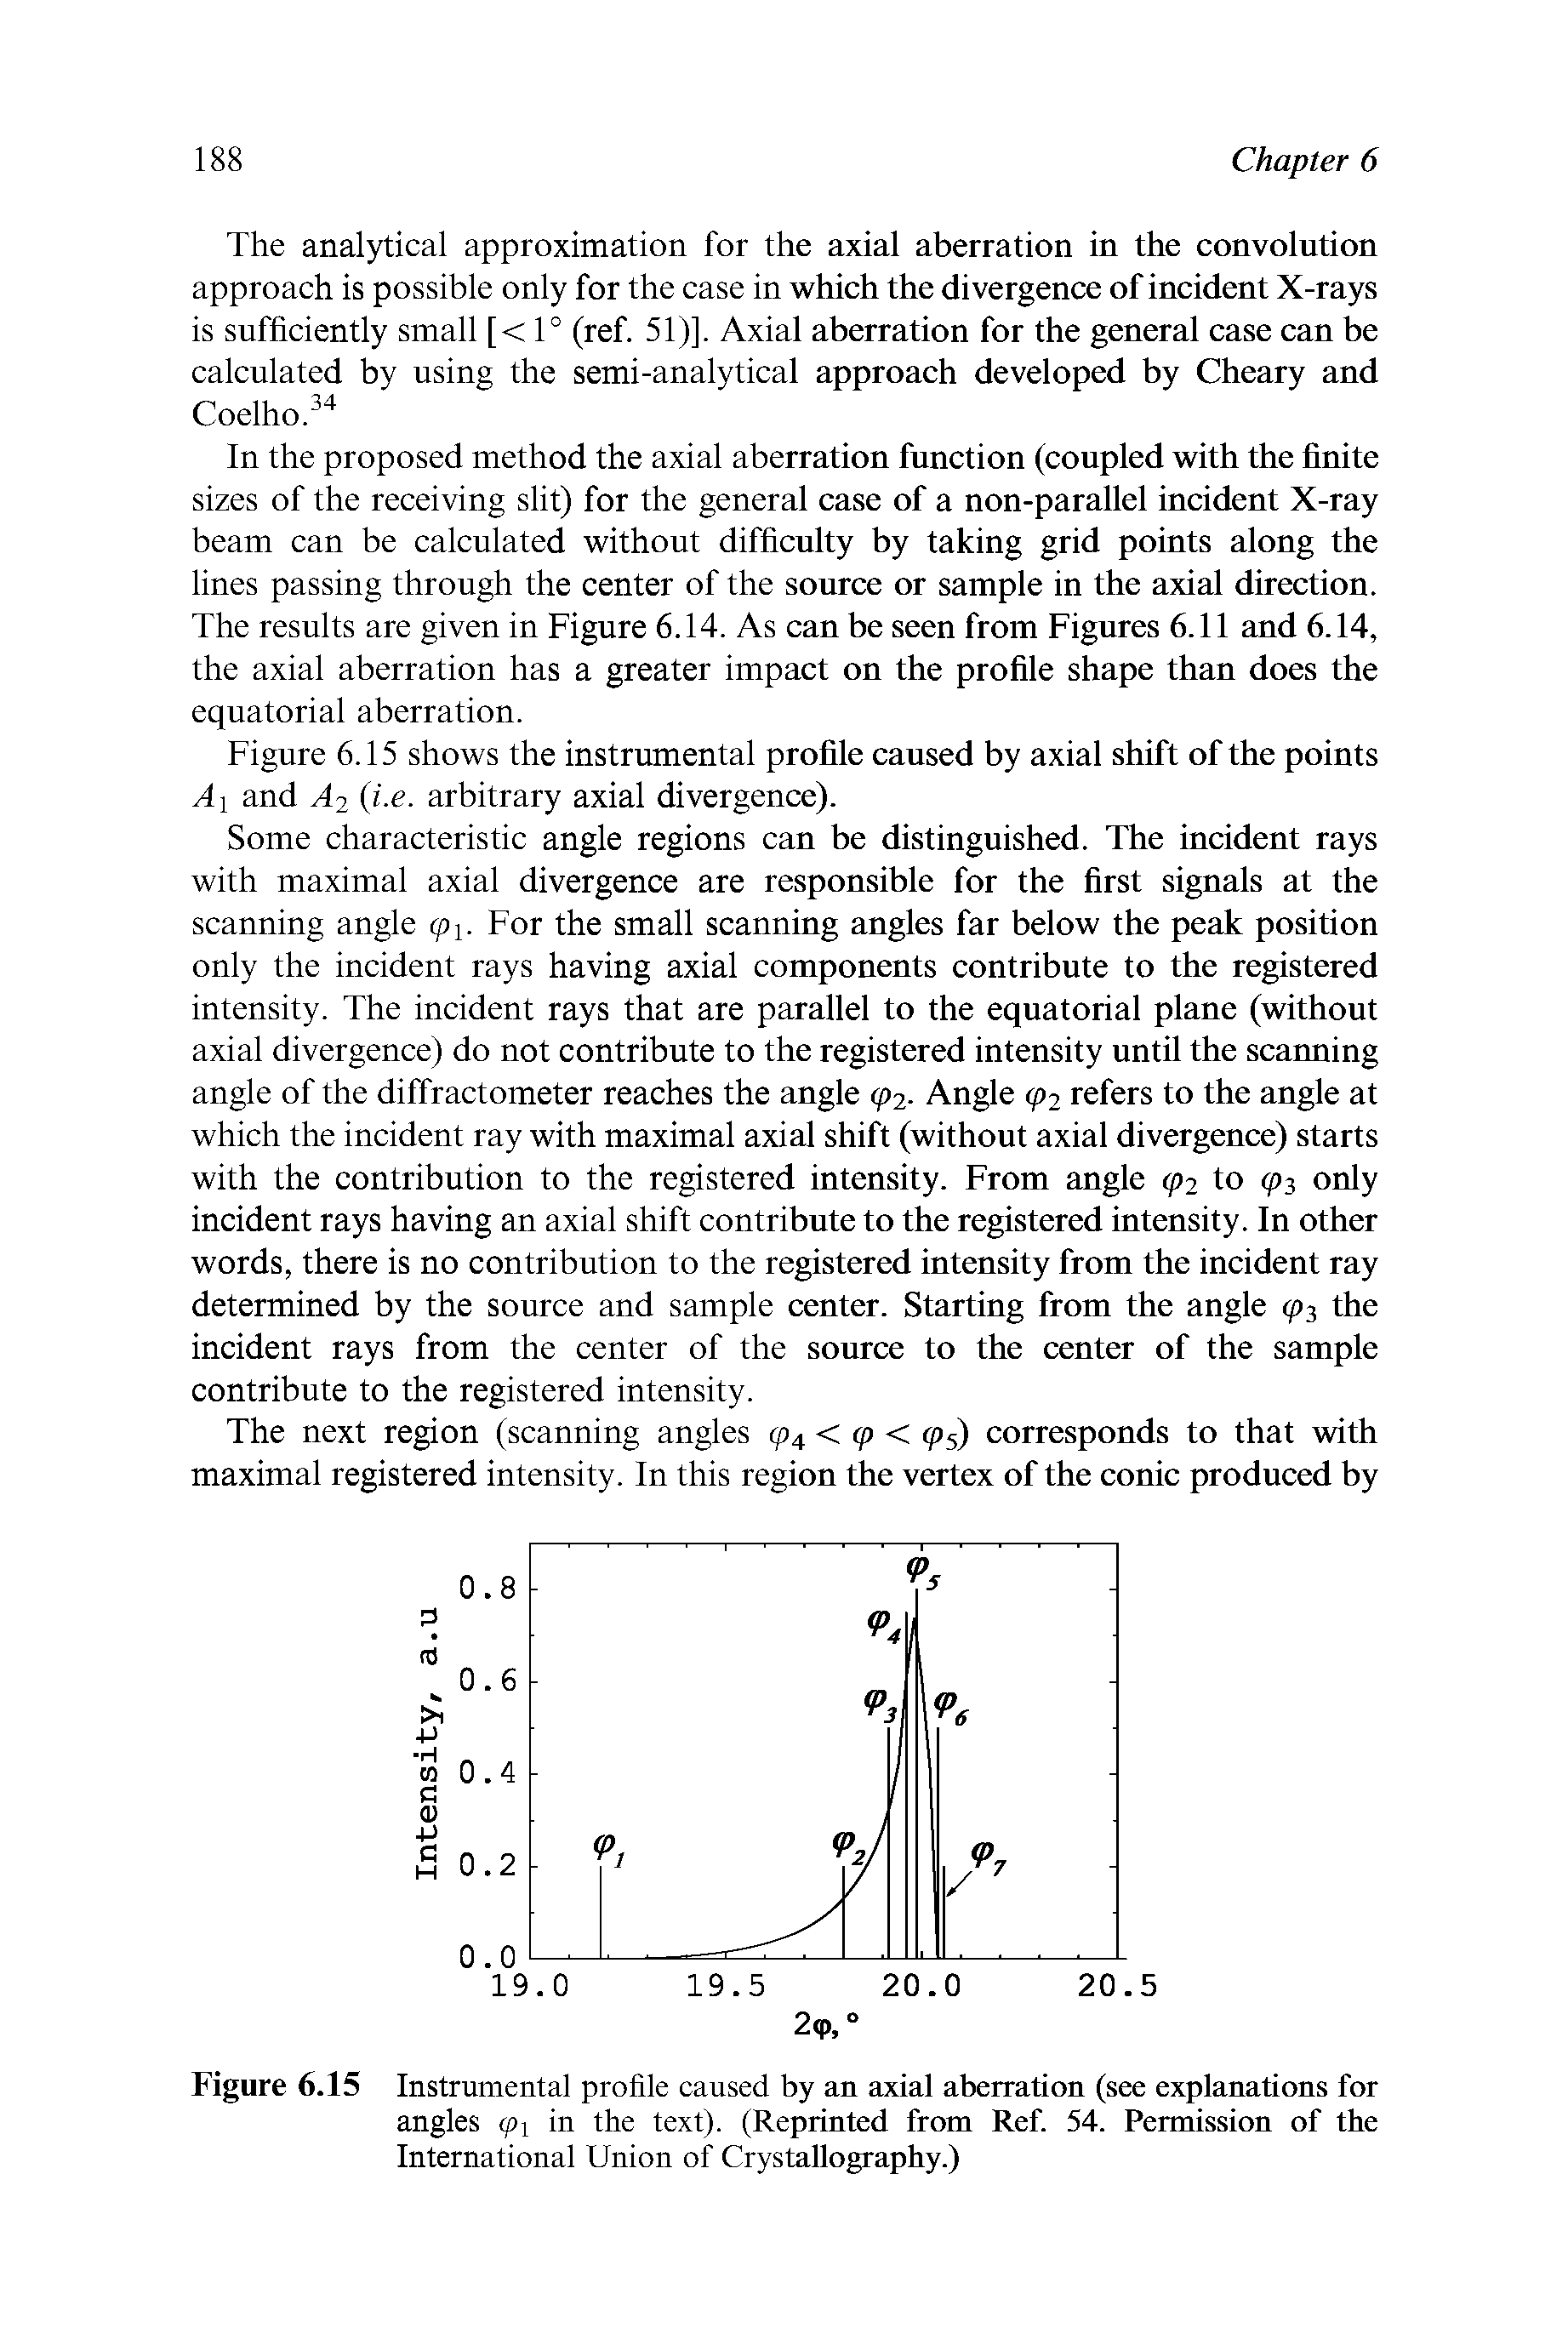 Figure 6.15 Instrumental profile caused by an axial aberration (see explanations for angles <pi in the text). (Reprinted from Ref. 54. Permission of the International Union of Crystallography.)...